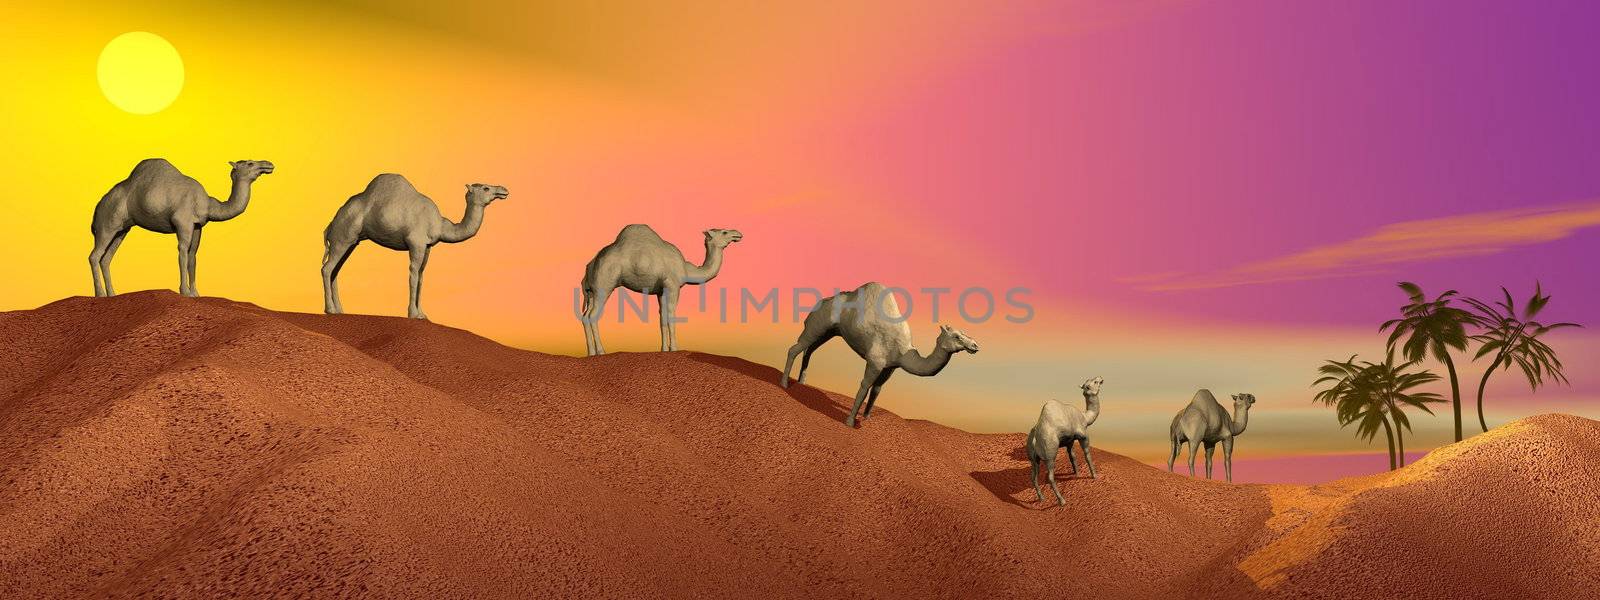 Caravan of camels walking in the desert to an oasis by sunset